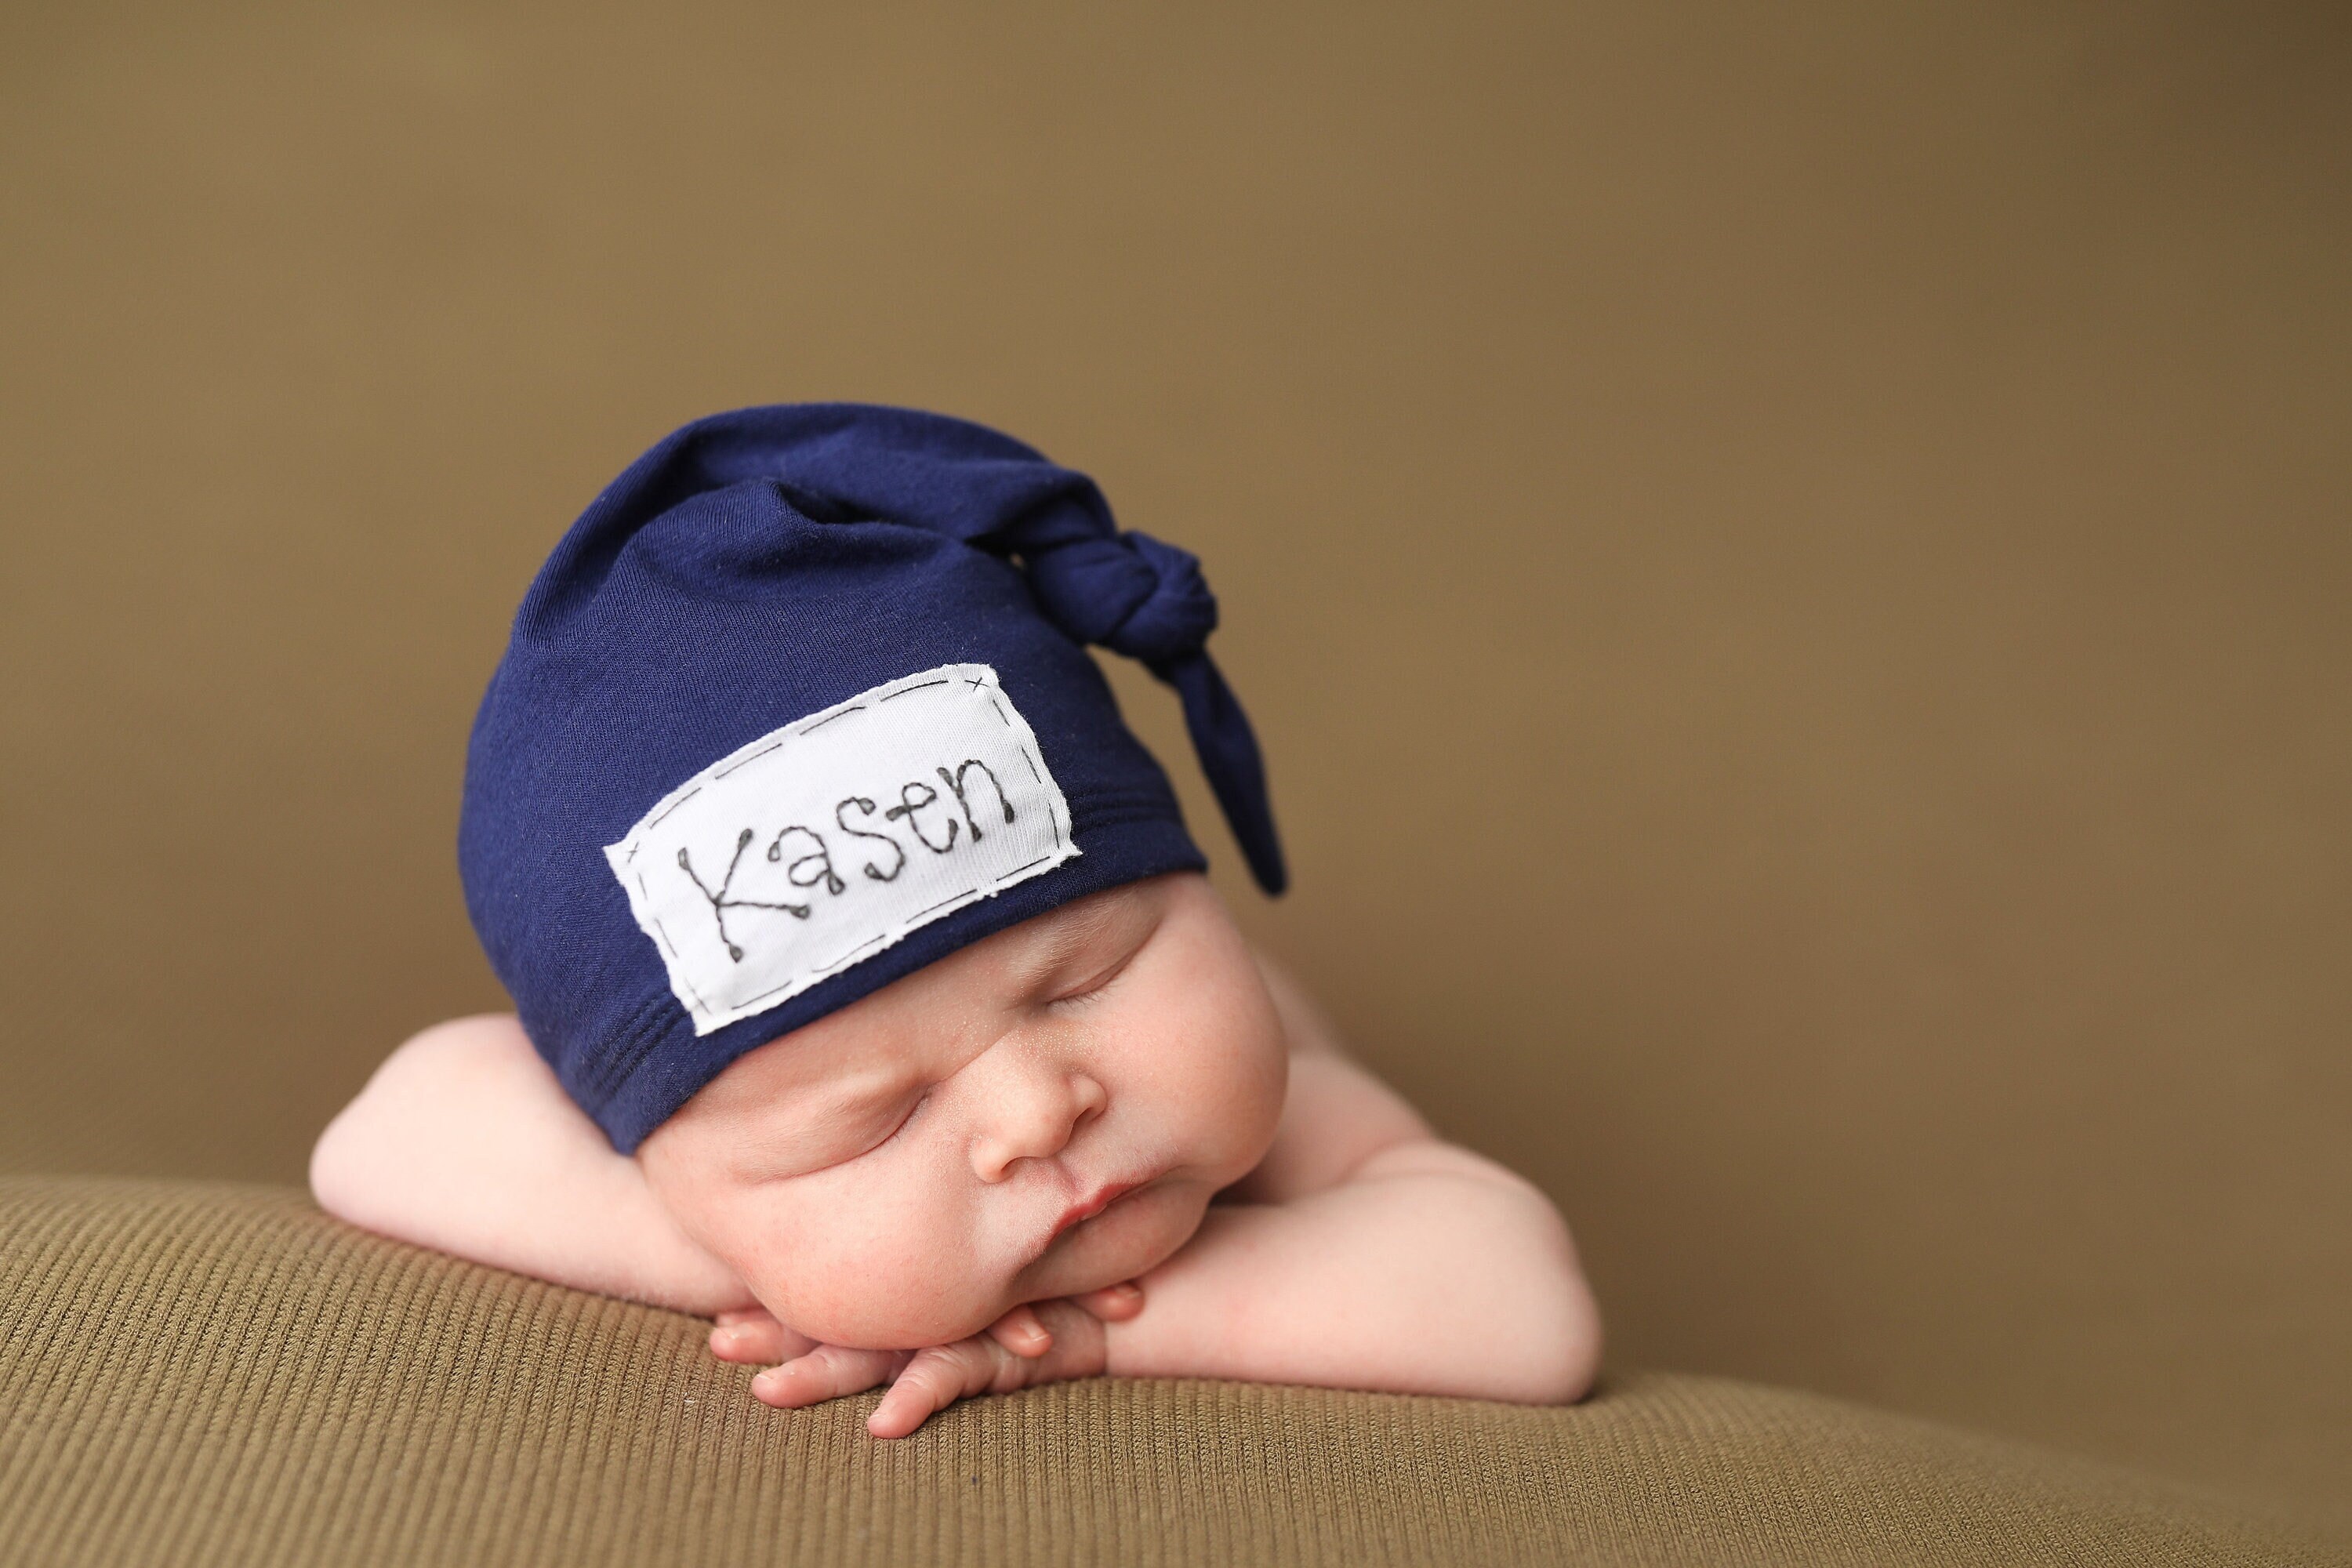 Navy & Black Monogram Hat, Baby Boy Knit Cap, Personalized Gift, Toddler Winter  Beanie, Newborn Photography Prop, Coming Home Outfit - Yahoo Shopping